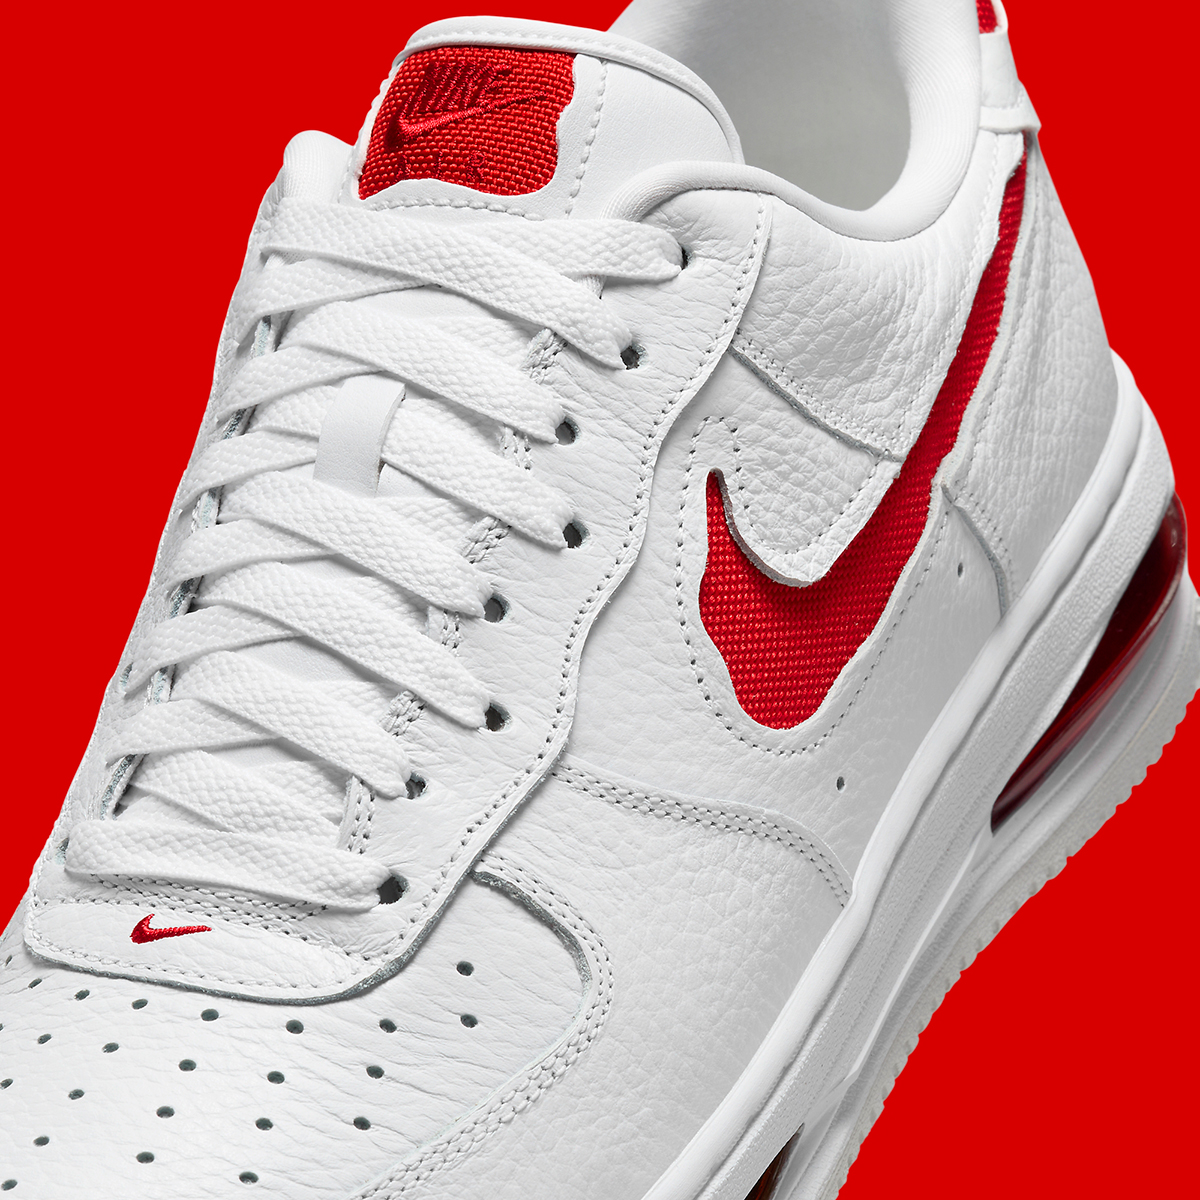 Nike Air Force 1 Low Evo White University Red Hf3630 100 9